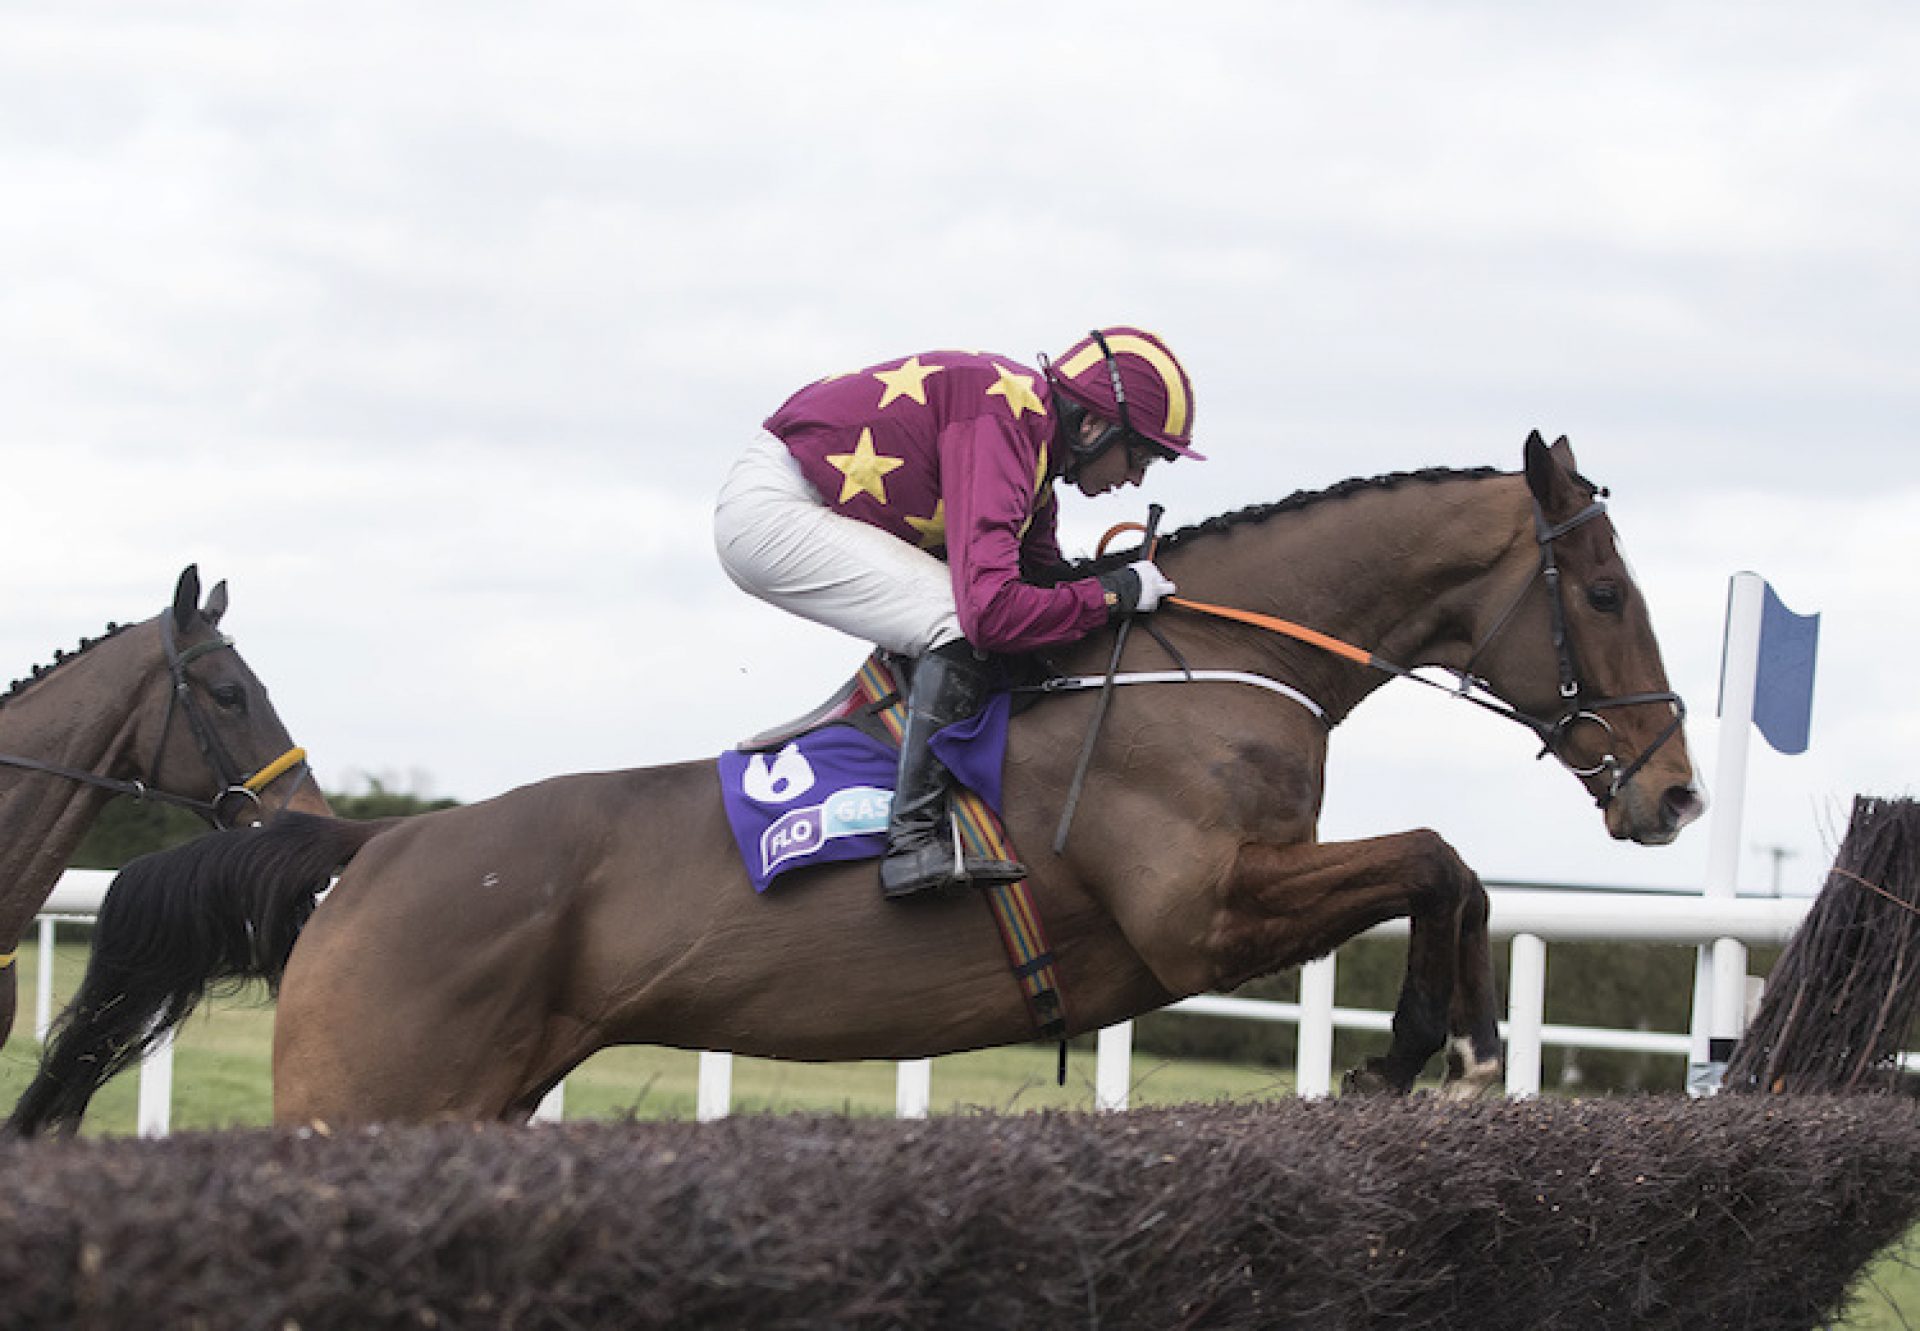 Monalee (Milan) winning the G1 G1 Flogas Novice Chase at Leopardstown